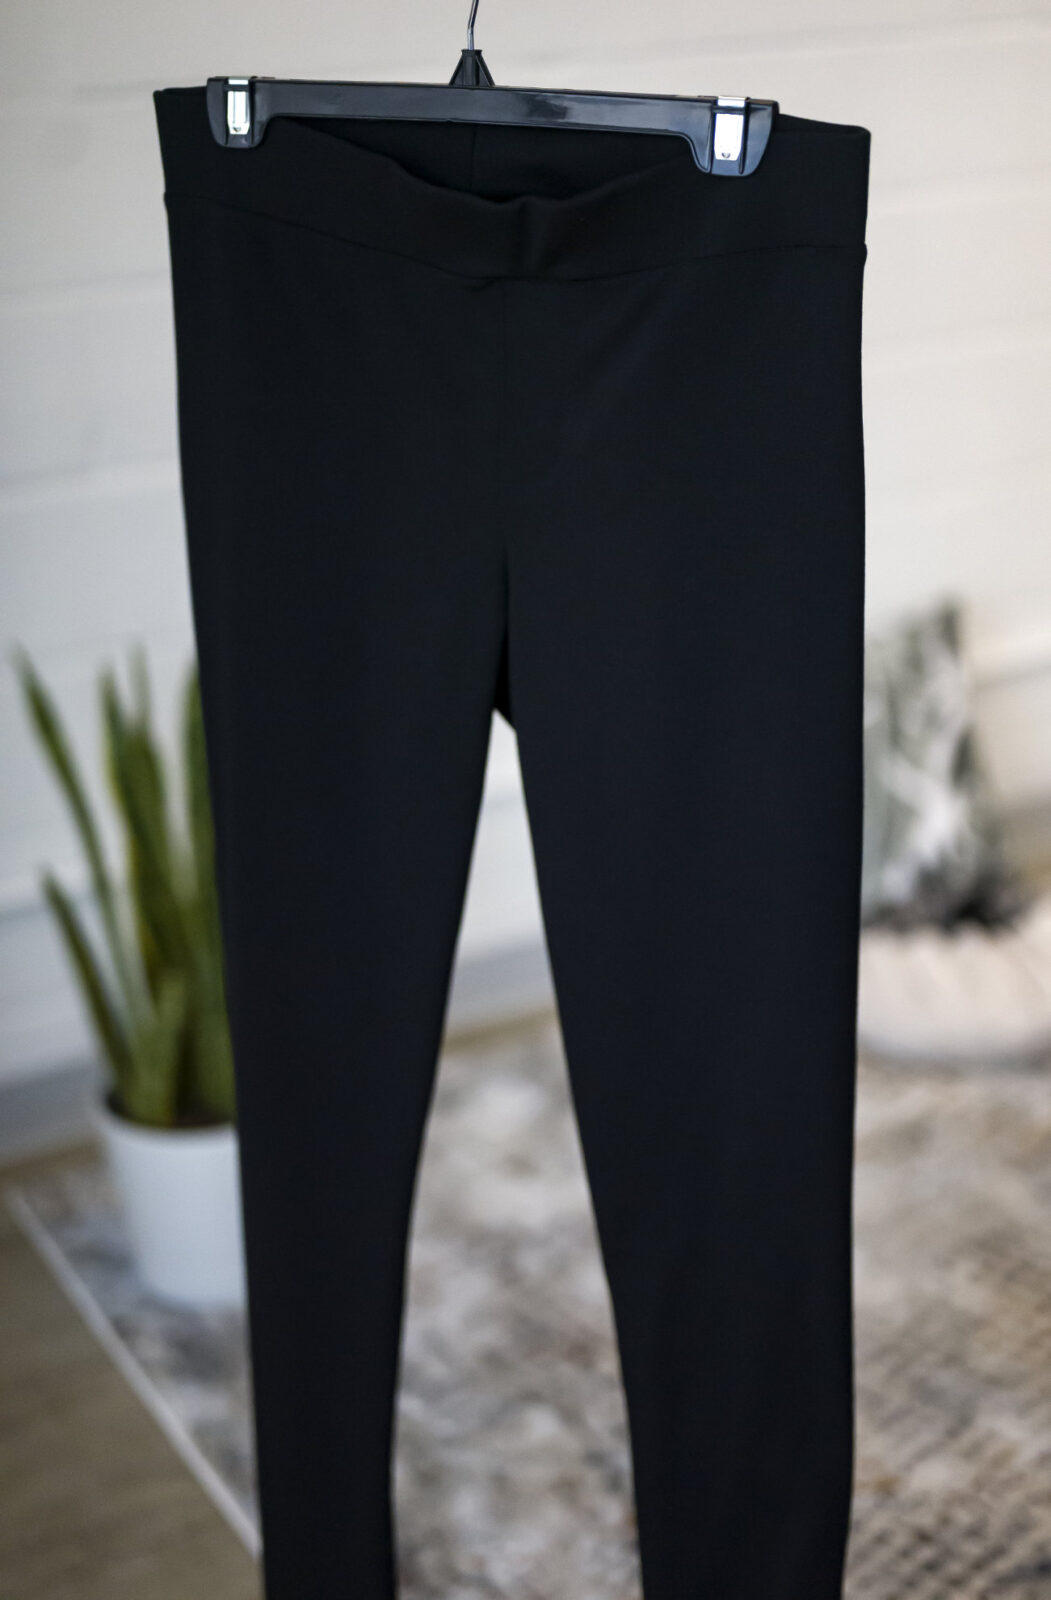 Delice Pants by Marie C, Black, pull-on, slim fit, Ponte di Roma fabric, rear pockets, sizes XS to XL, made in Quebec